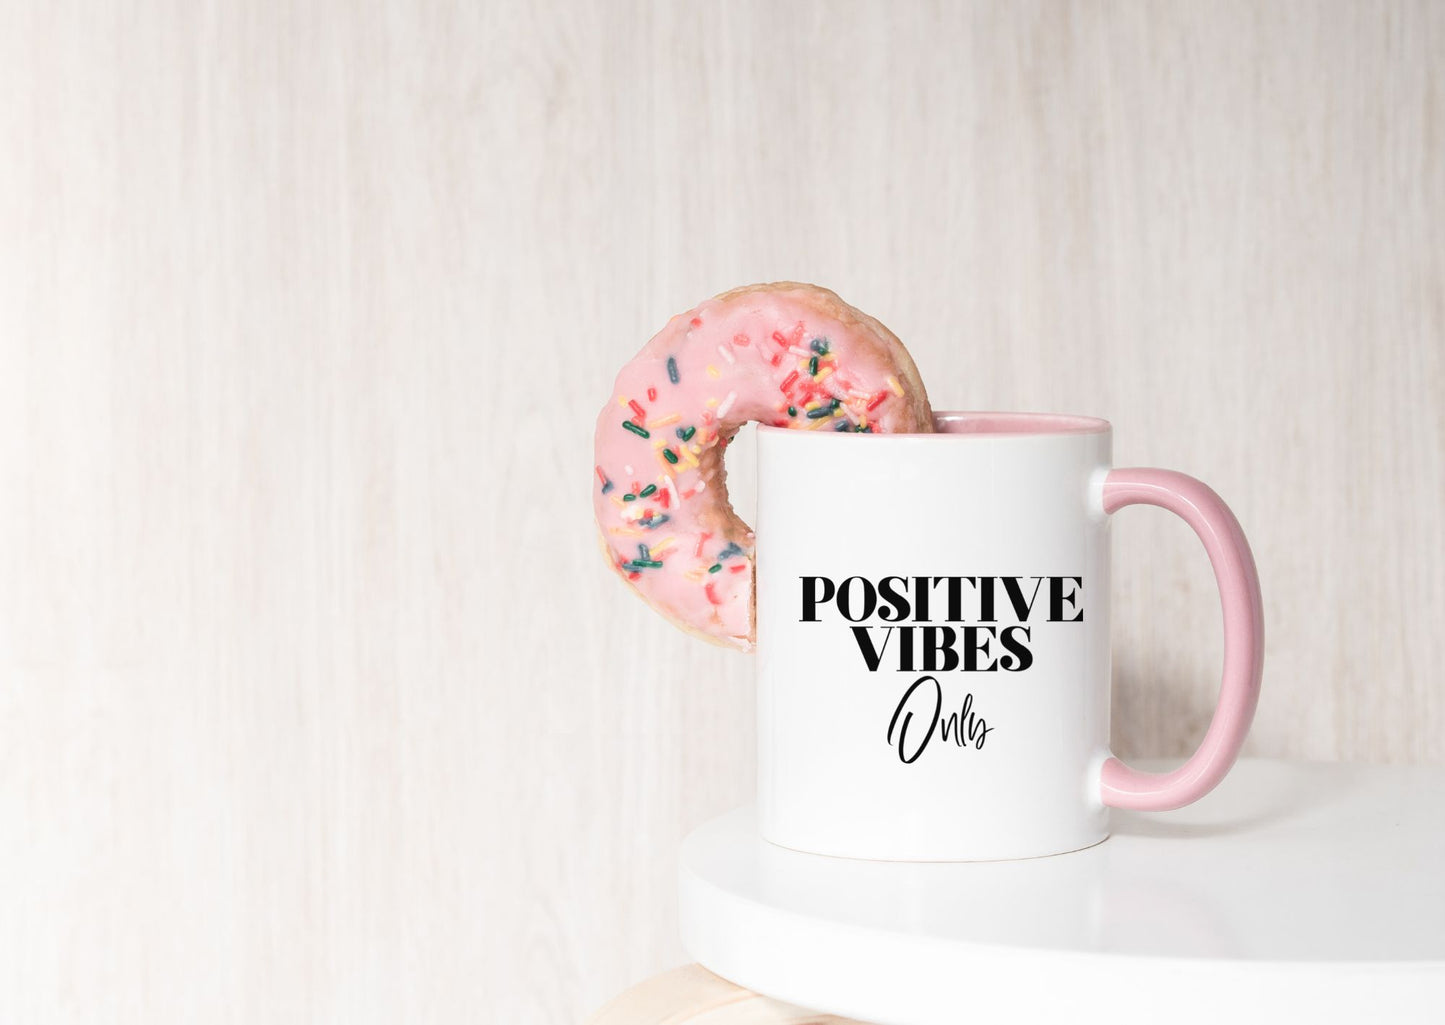 Positive Vibes Only Coffee Mug with Pink Handle and Interior, 11 oz. 